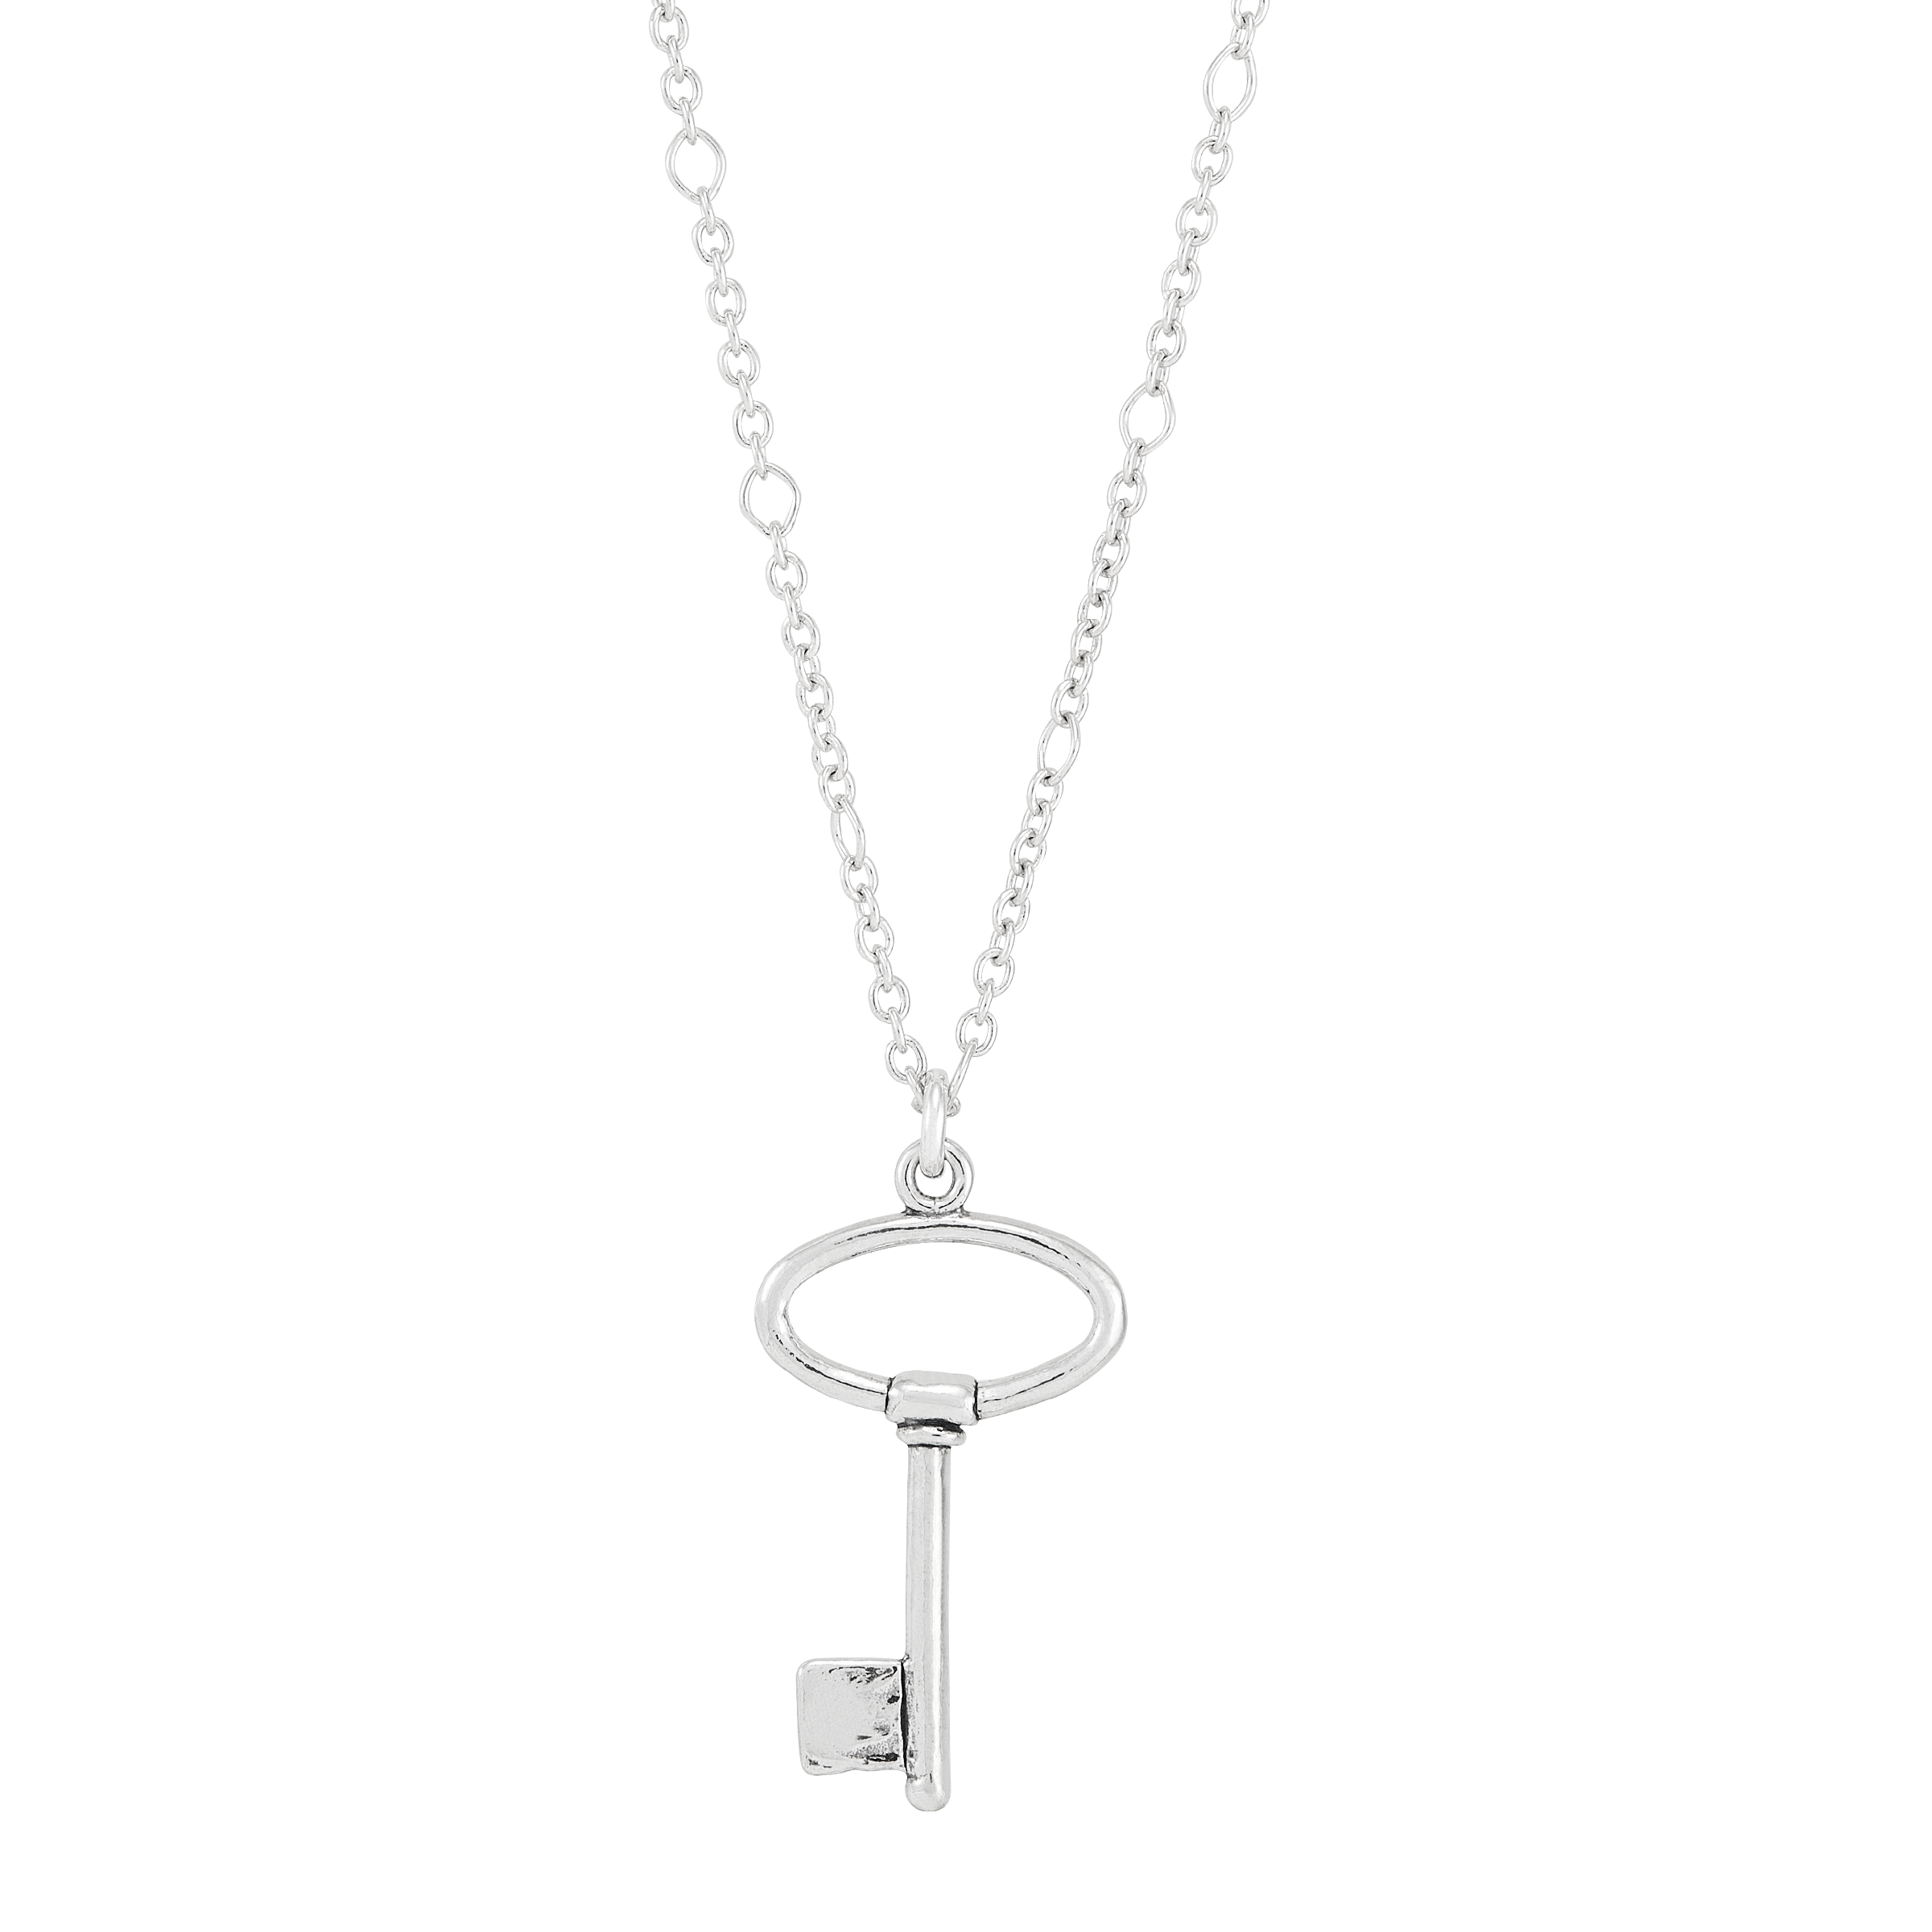 Best Deals for Tiffany And Co Lock And Key Necklace